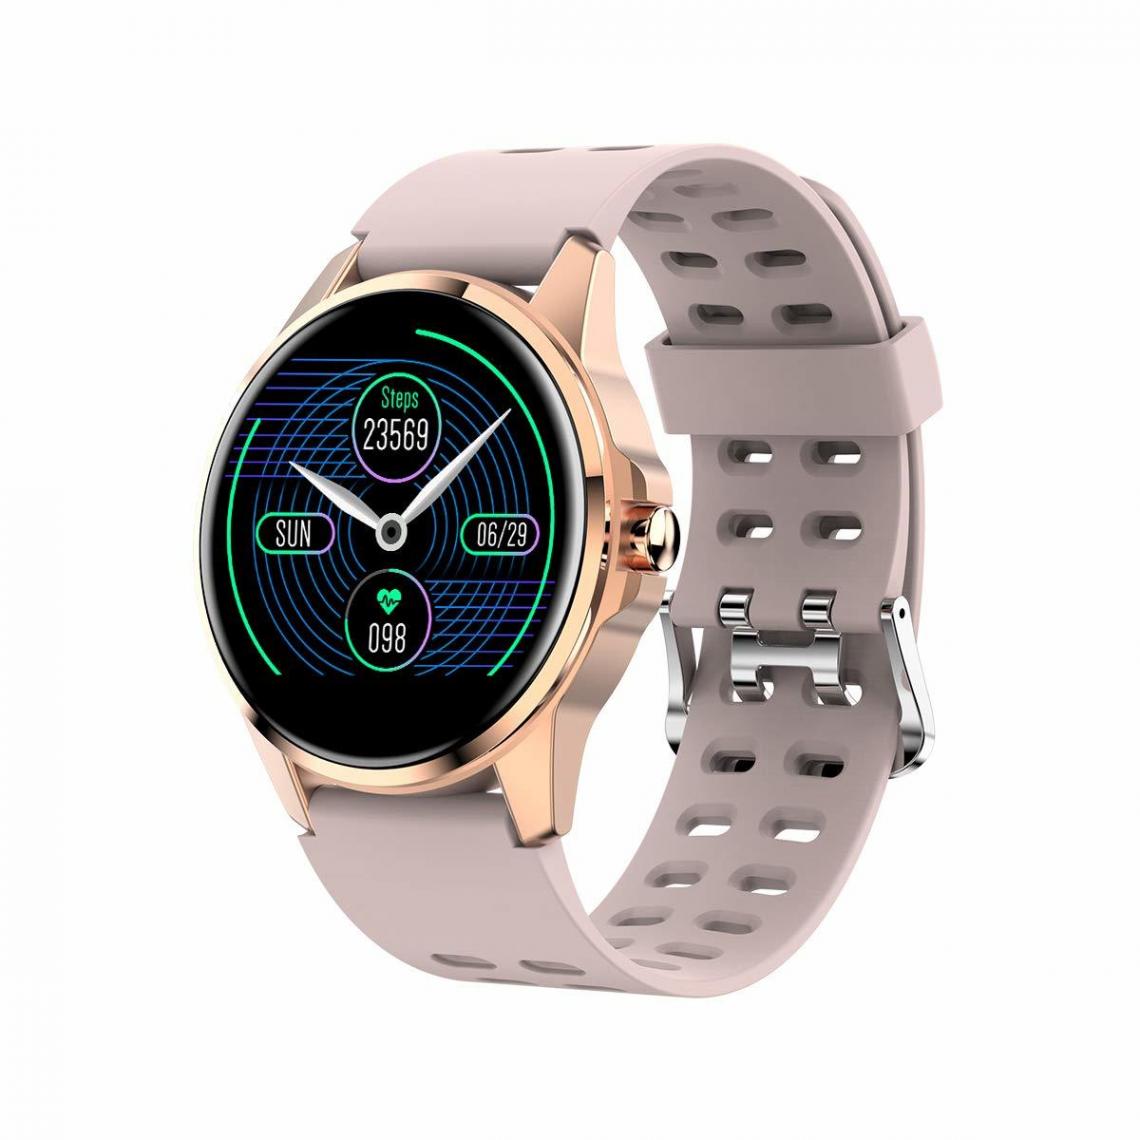 Chronotech Montres - Smart Watch Activity Fitness Trackers Heart Rate Sleep Blood Pressure Monitor Step Counter Pedometer Android iOS Watches for Women Men Waterproof Sports Wrist Smartwatch(Rose) - Montre connectée